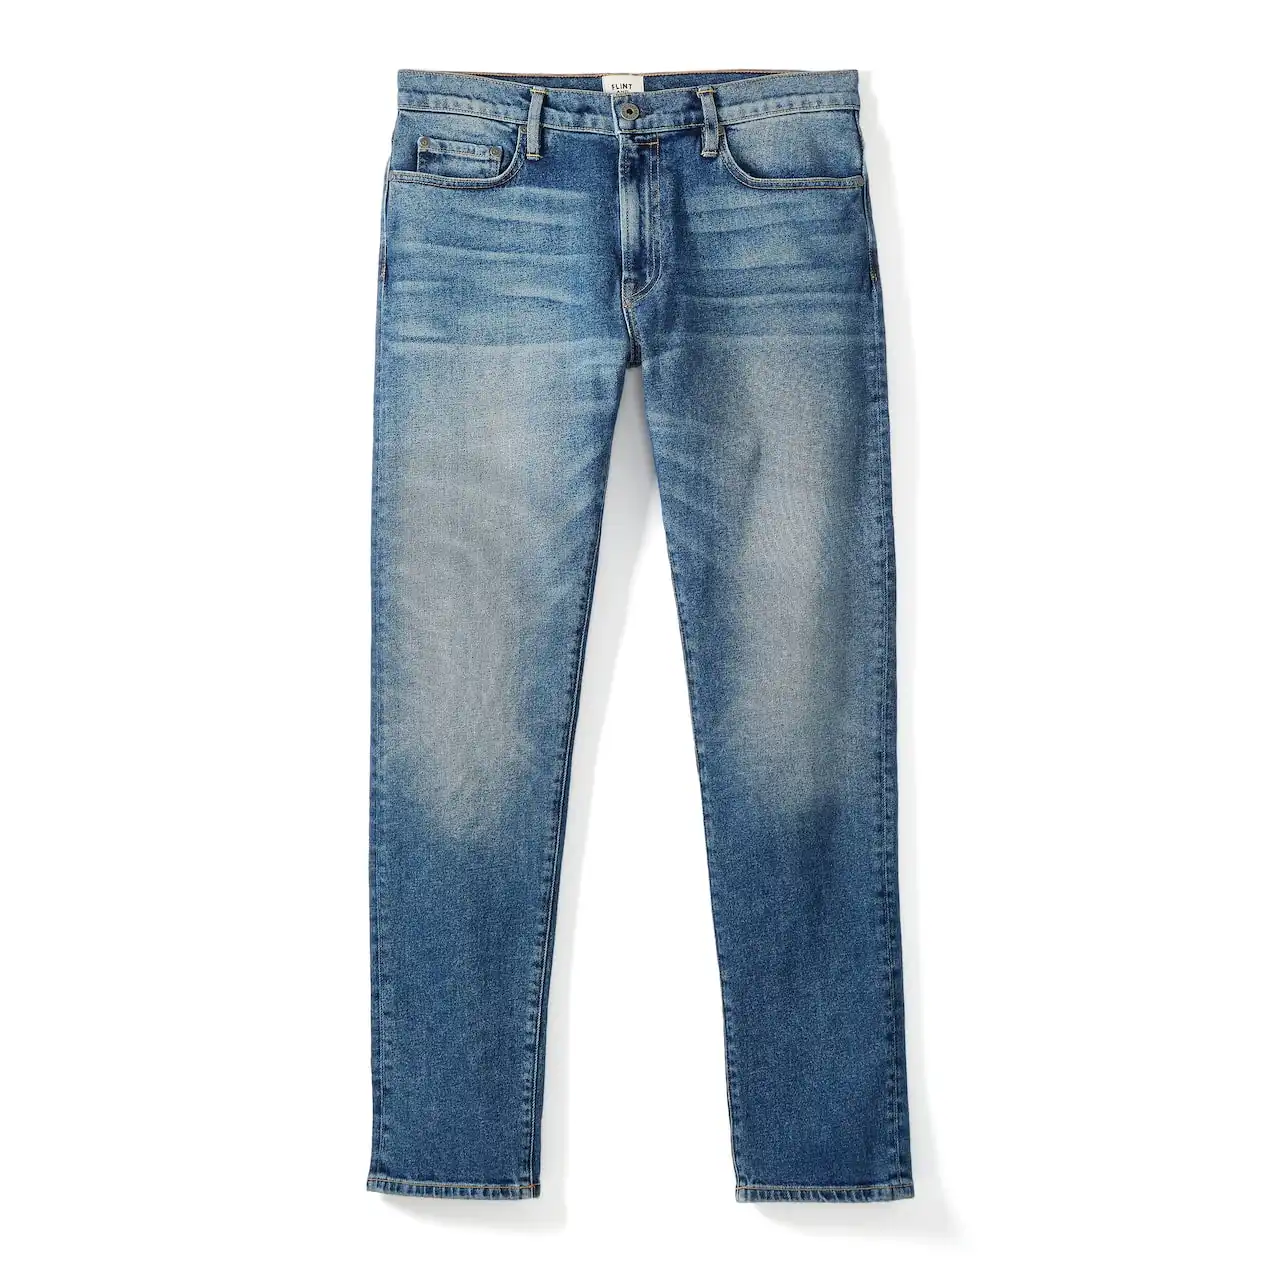 Flint and Tinder All American Stretch Tapered Denim